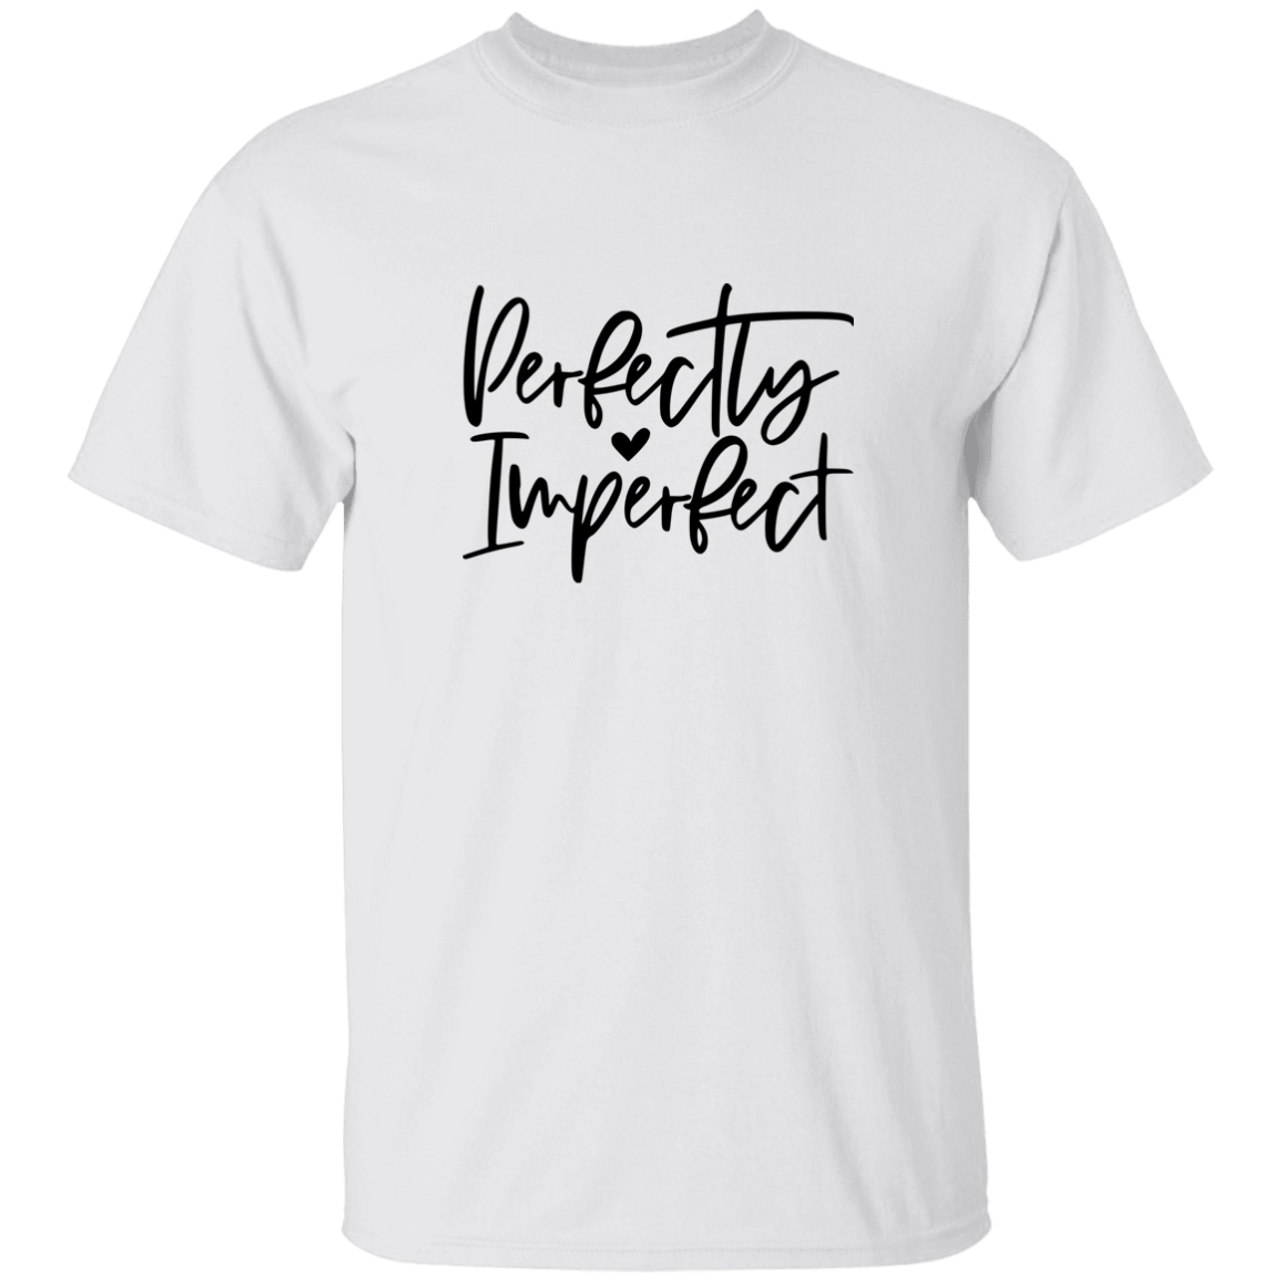 Perfectly Imperfect G500 5.3 oz. T-Shirt